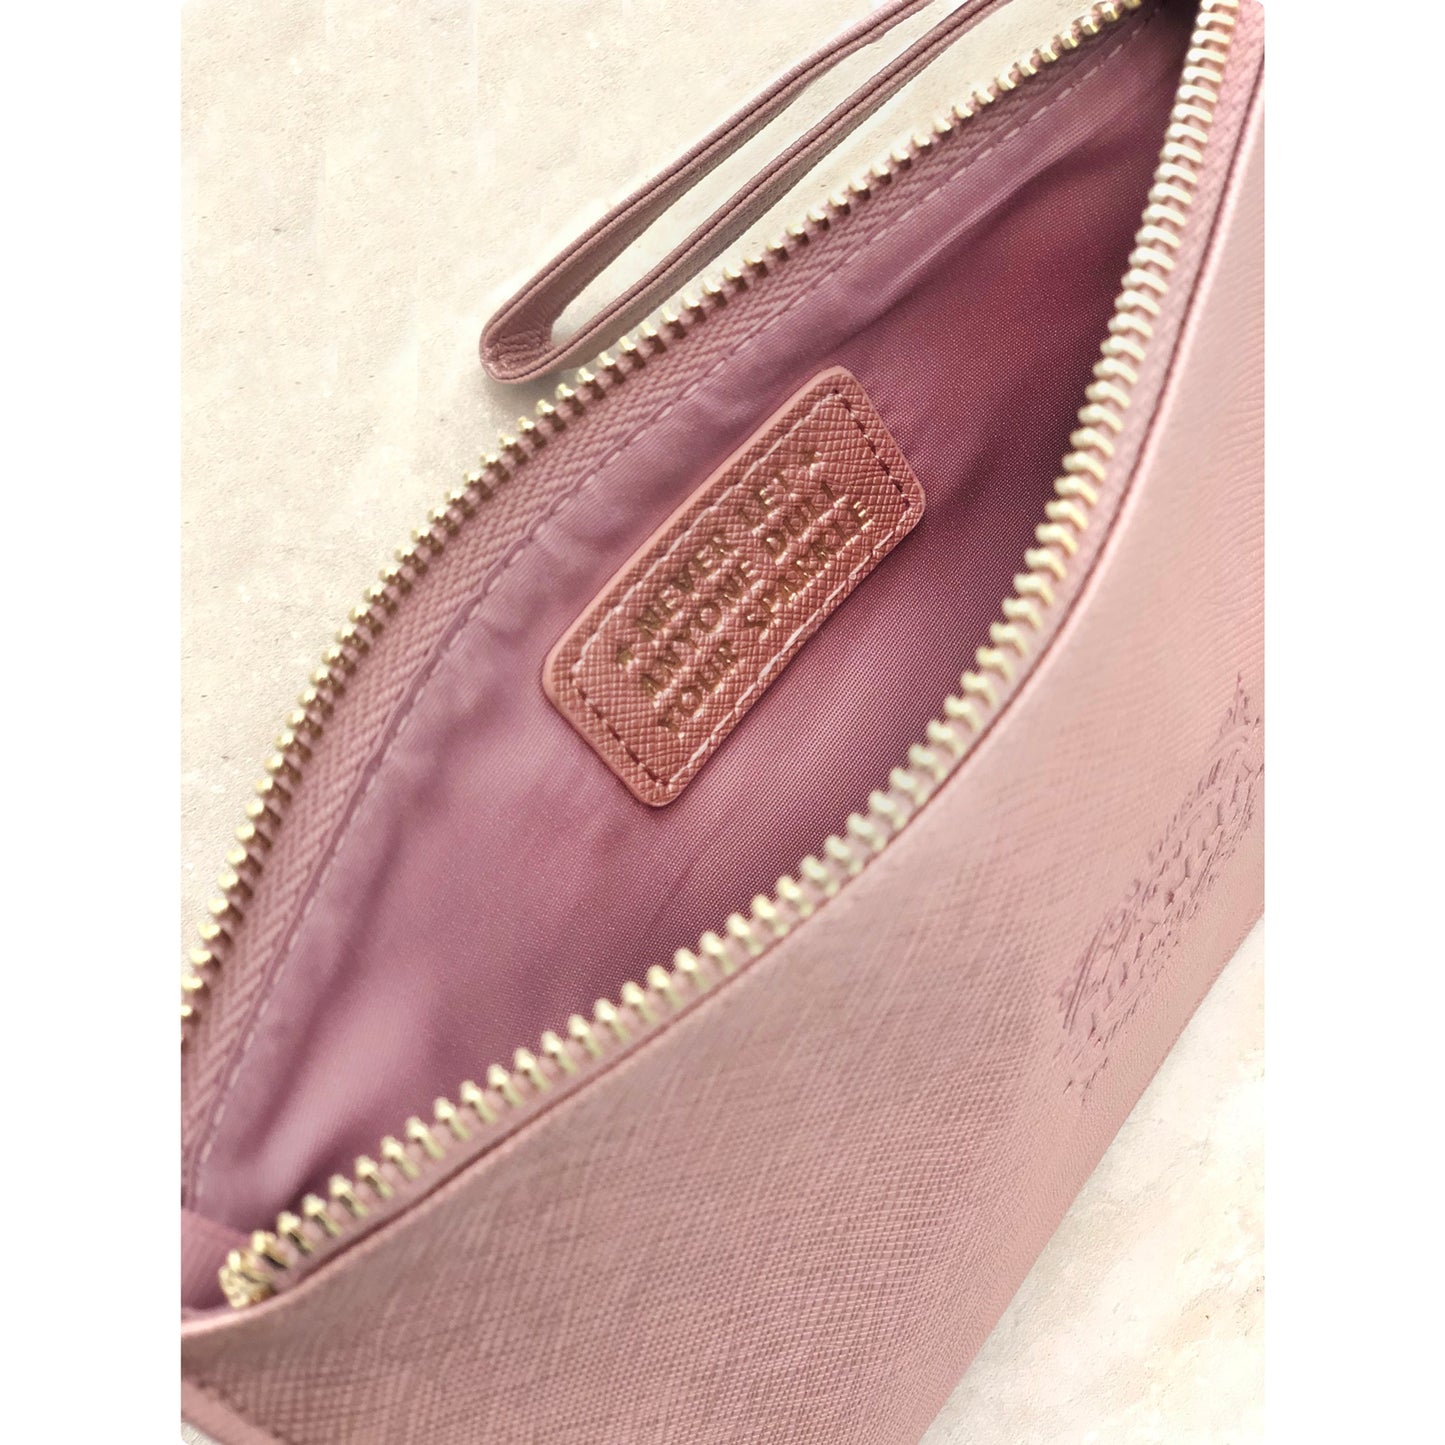 Clutch Bag With Handle & Embossed Text "Charlotte"